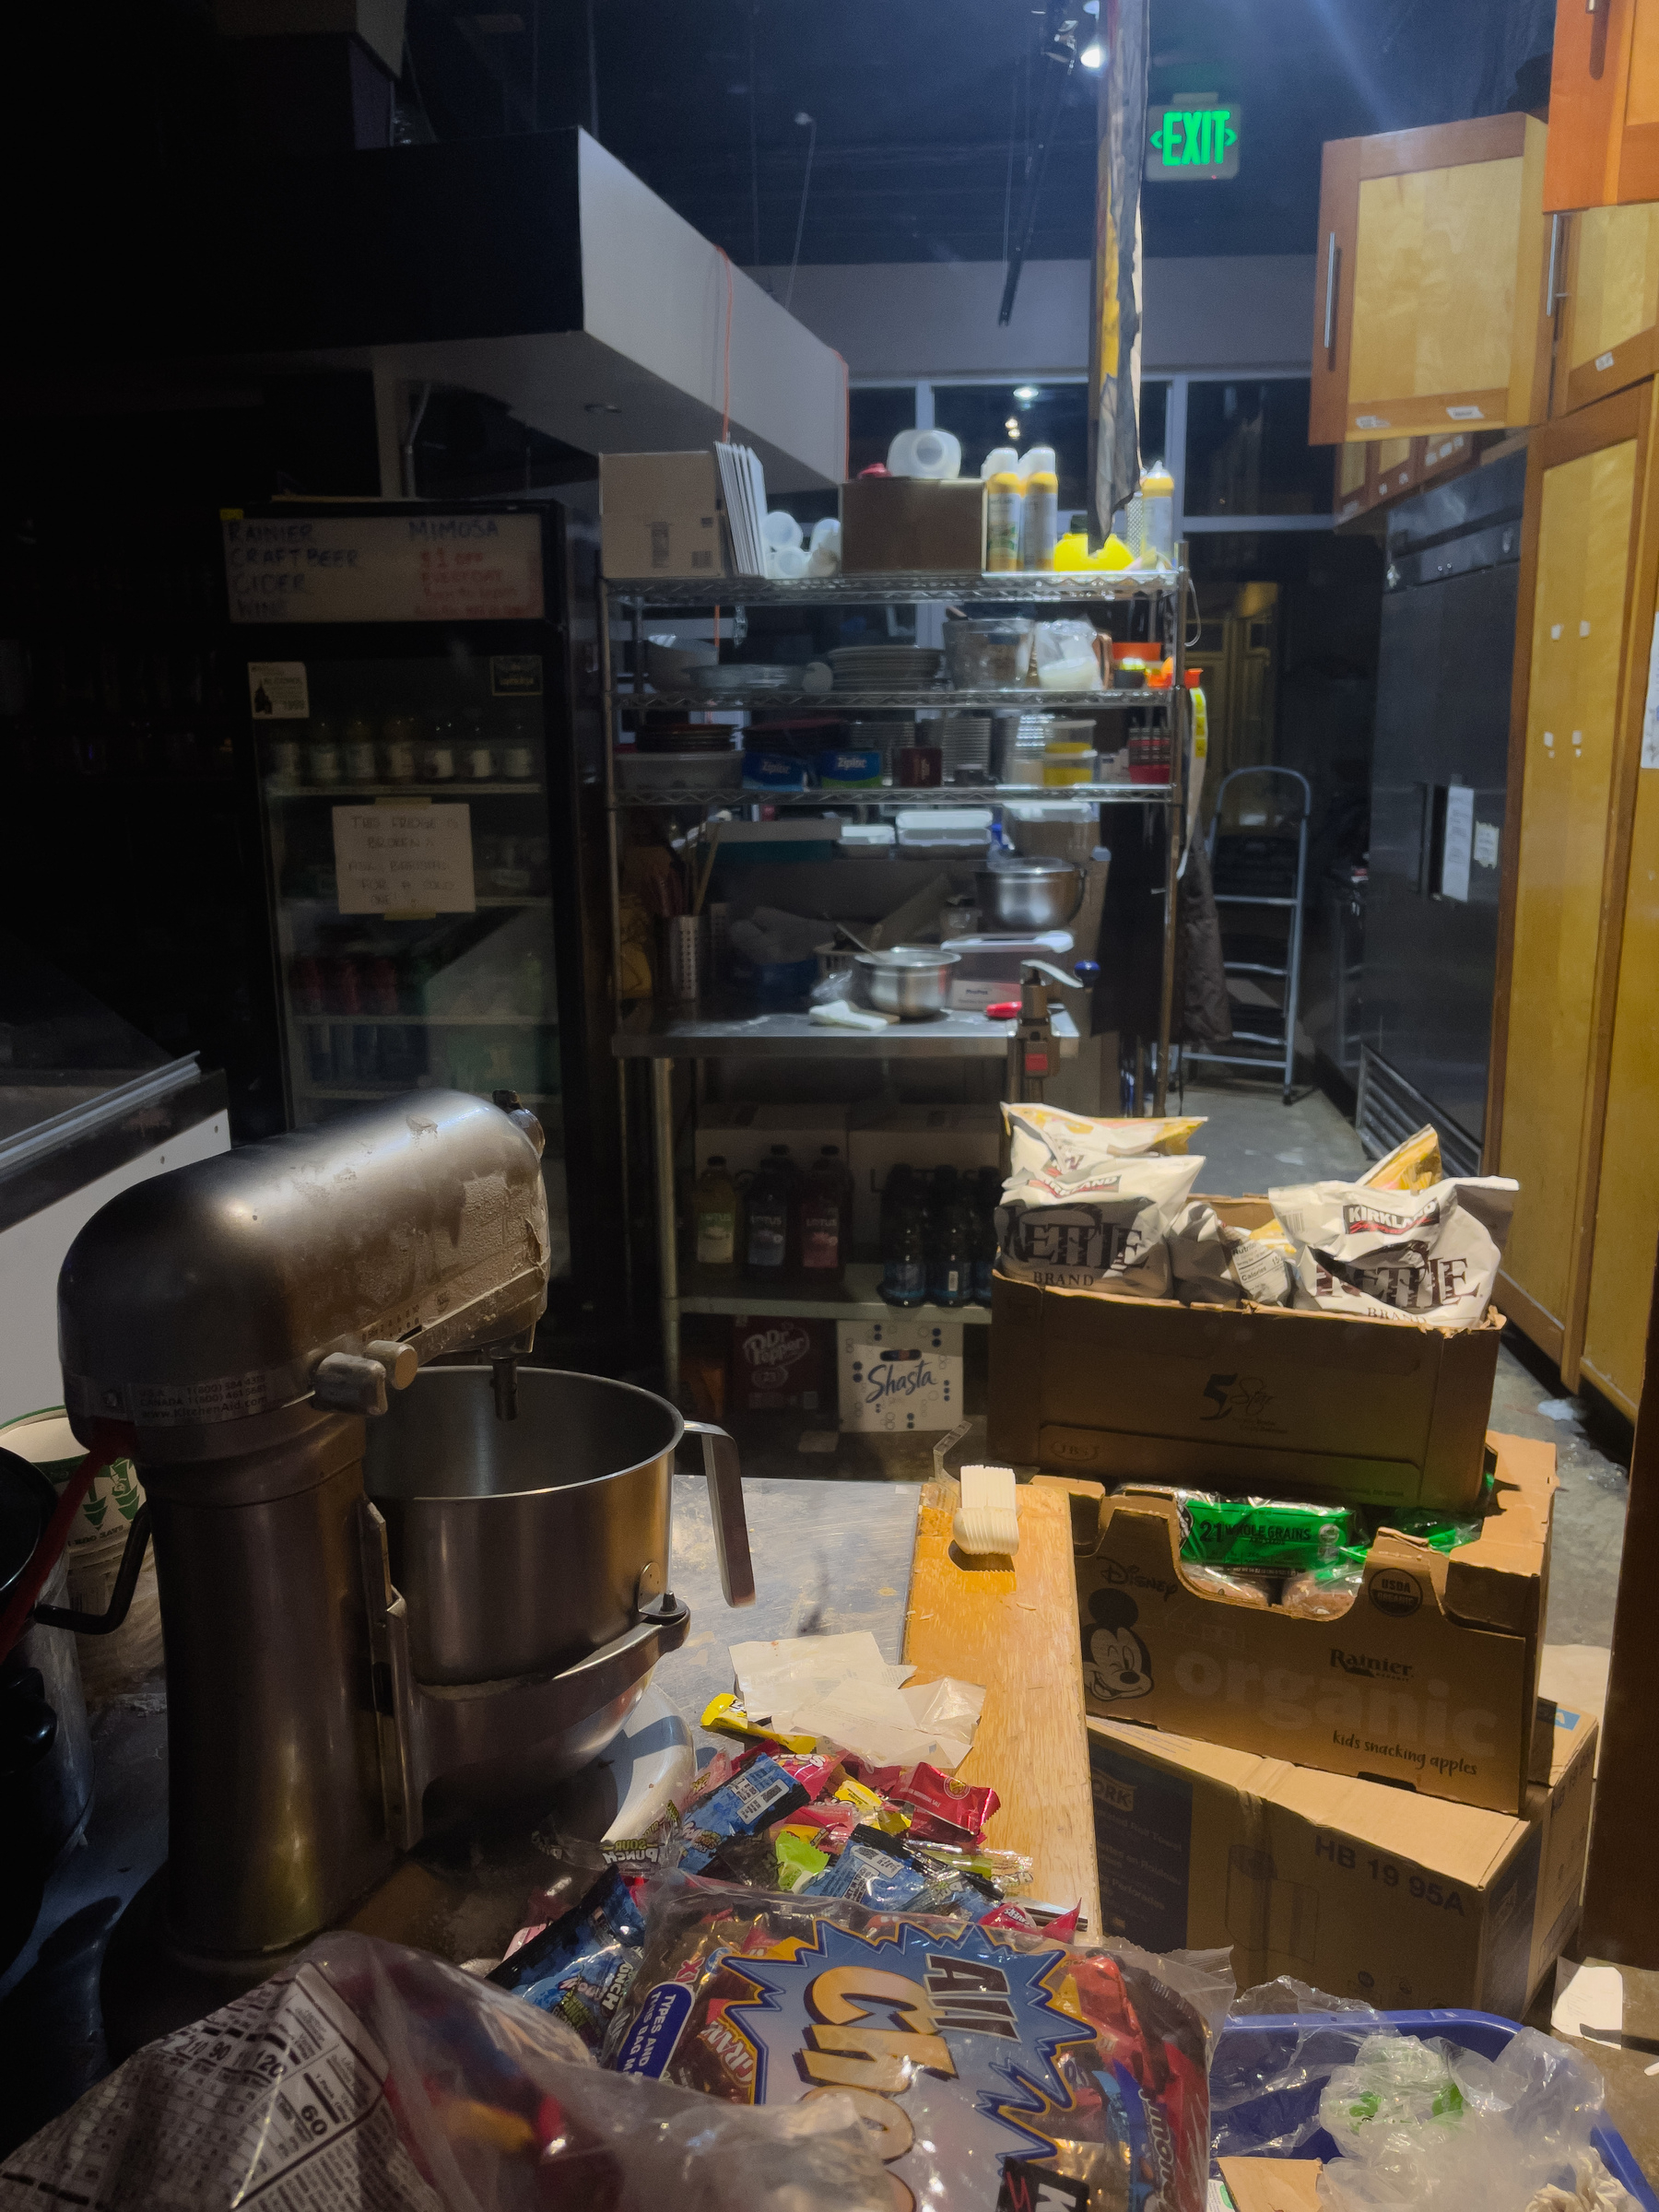 Interior of messy restaurant kitchen with stand mixer in the left foreground.